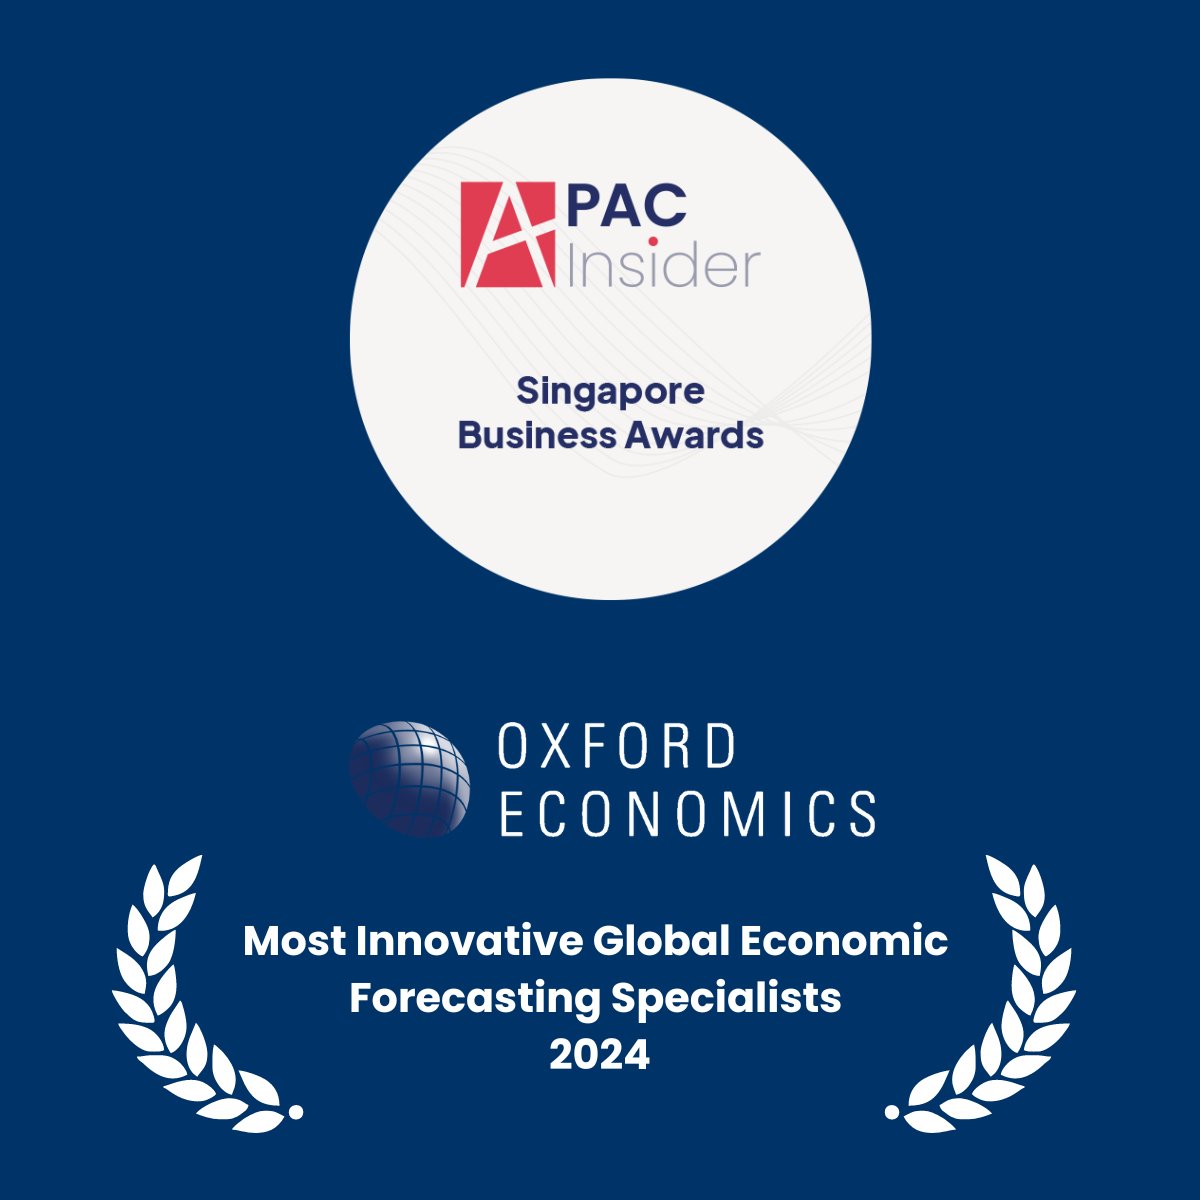 Oxford Economics is named the Most Innovative Global Economic Forecasting Specialists 2024 by Singapore Business Awards hosted by APAC Insider 🎉 Explore our key themes in 2024: okt.to/vBFdaf #SingaporeBusinessAwards #Awards #APACInsider